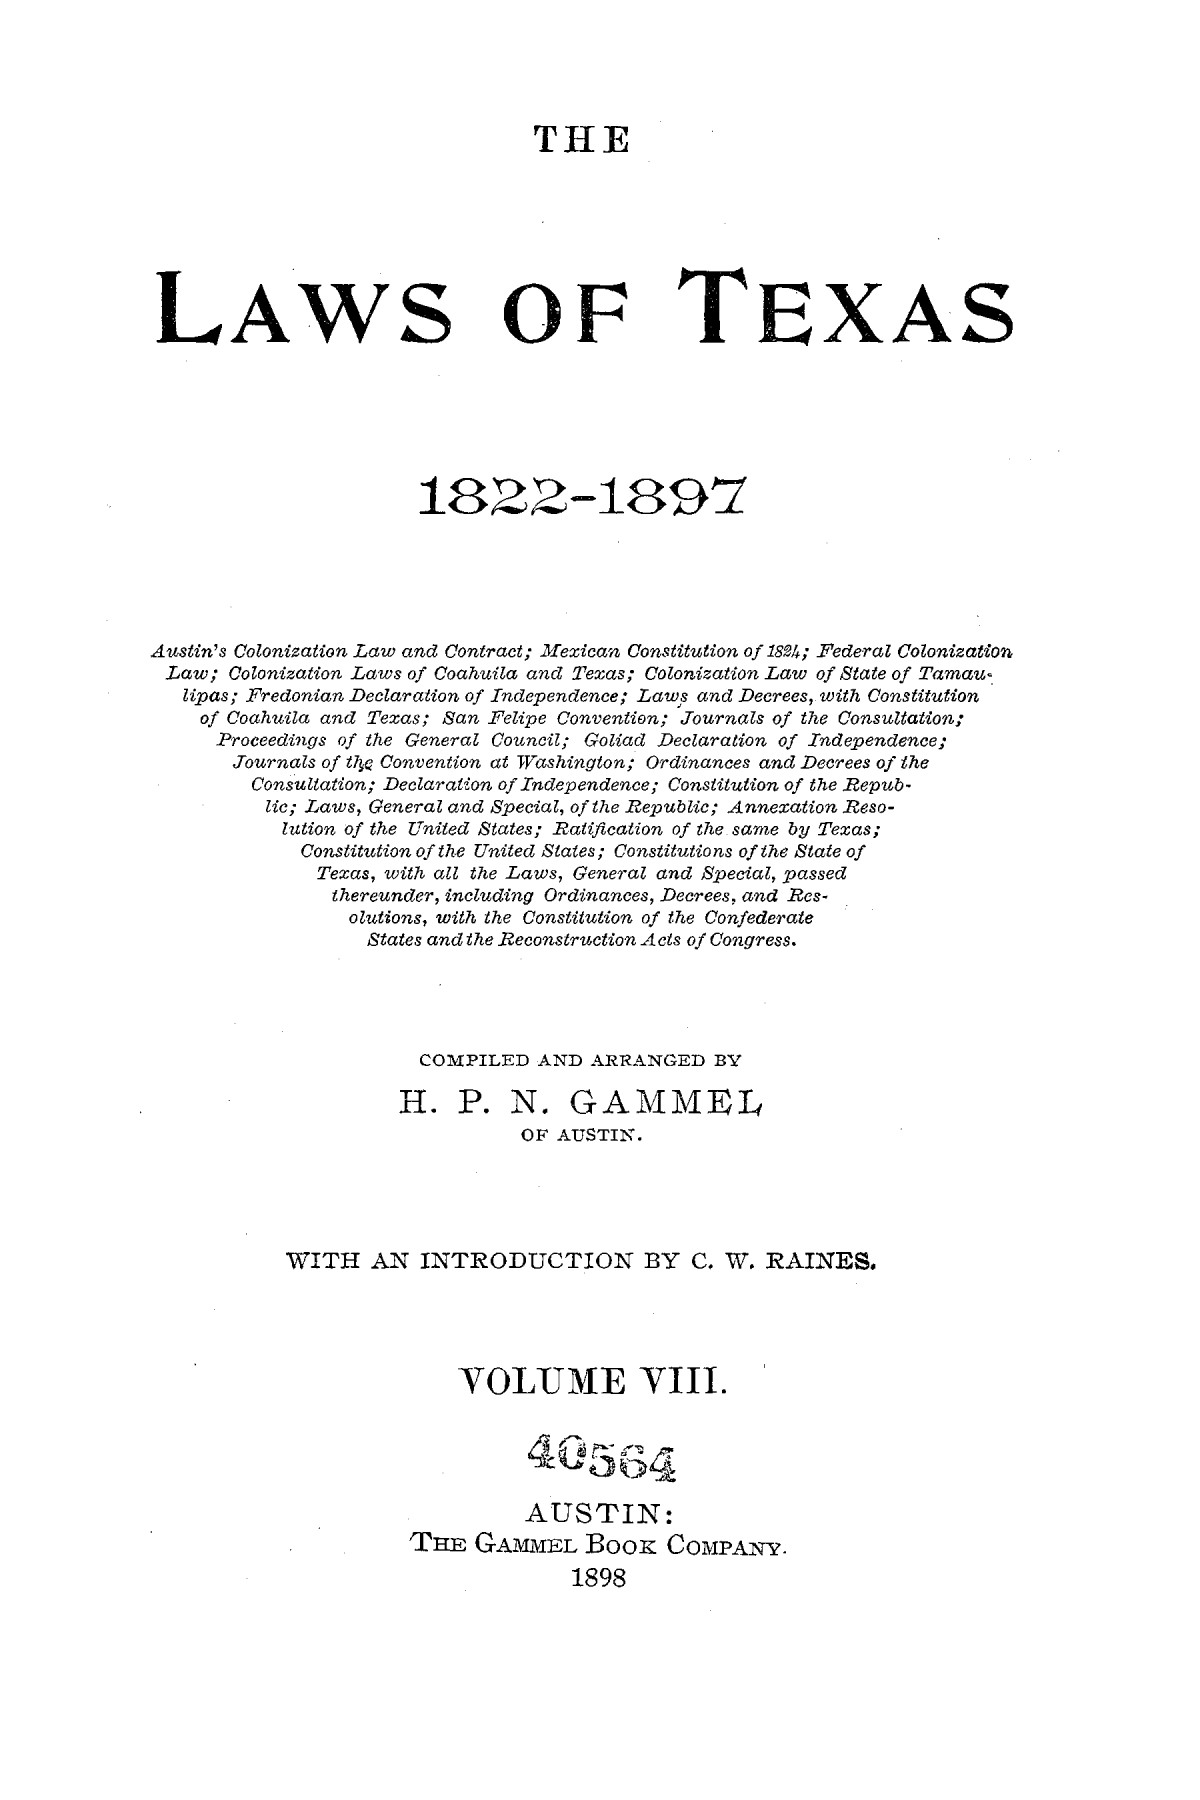 The Laws of Texas, 1822-1897 Volume 8
                                                
                                                    A
                                                